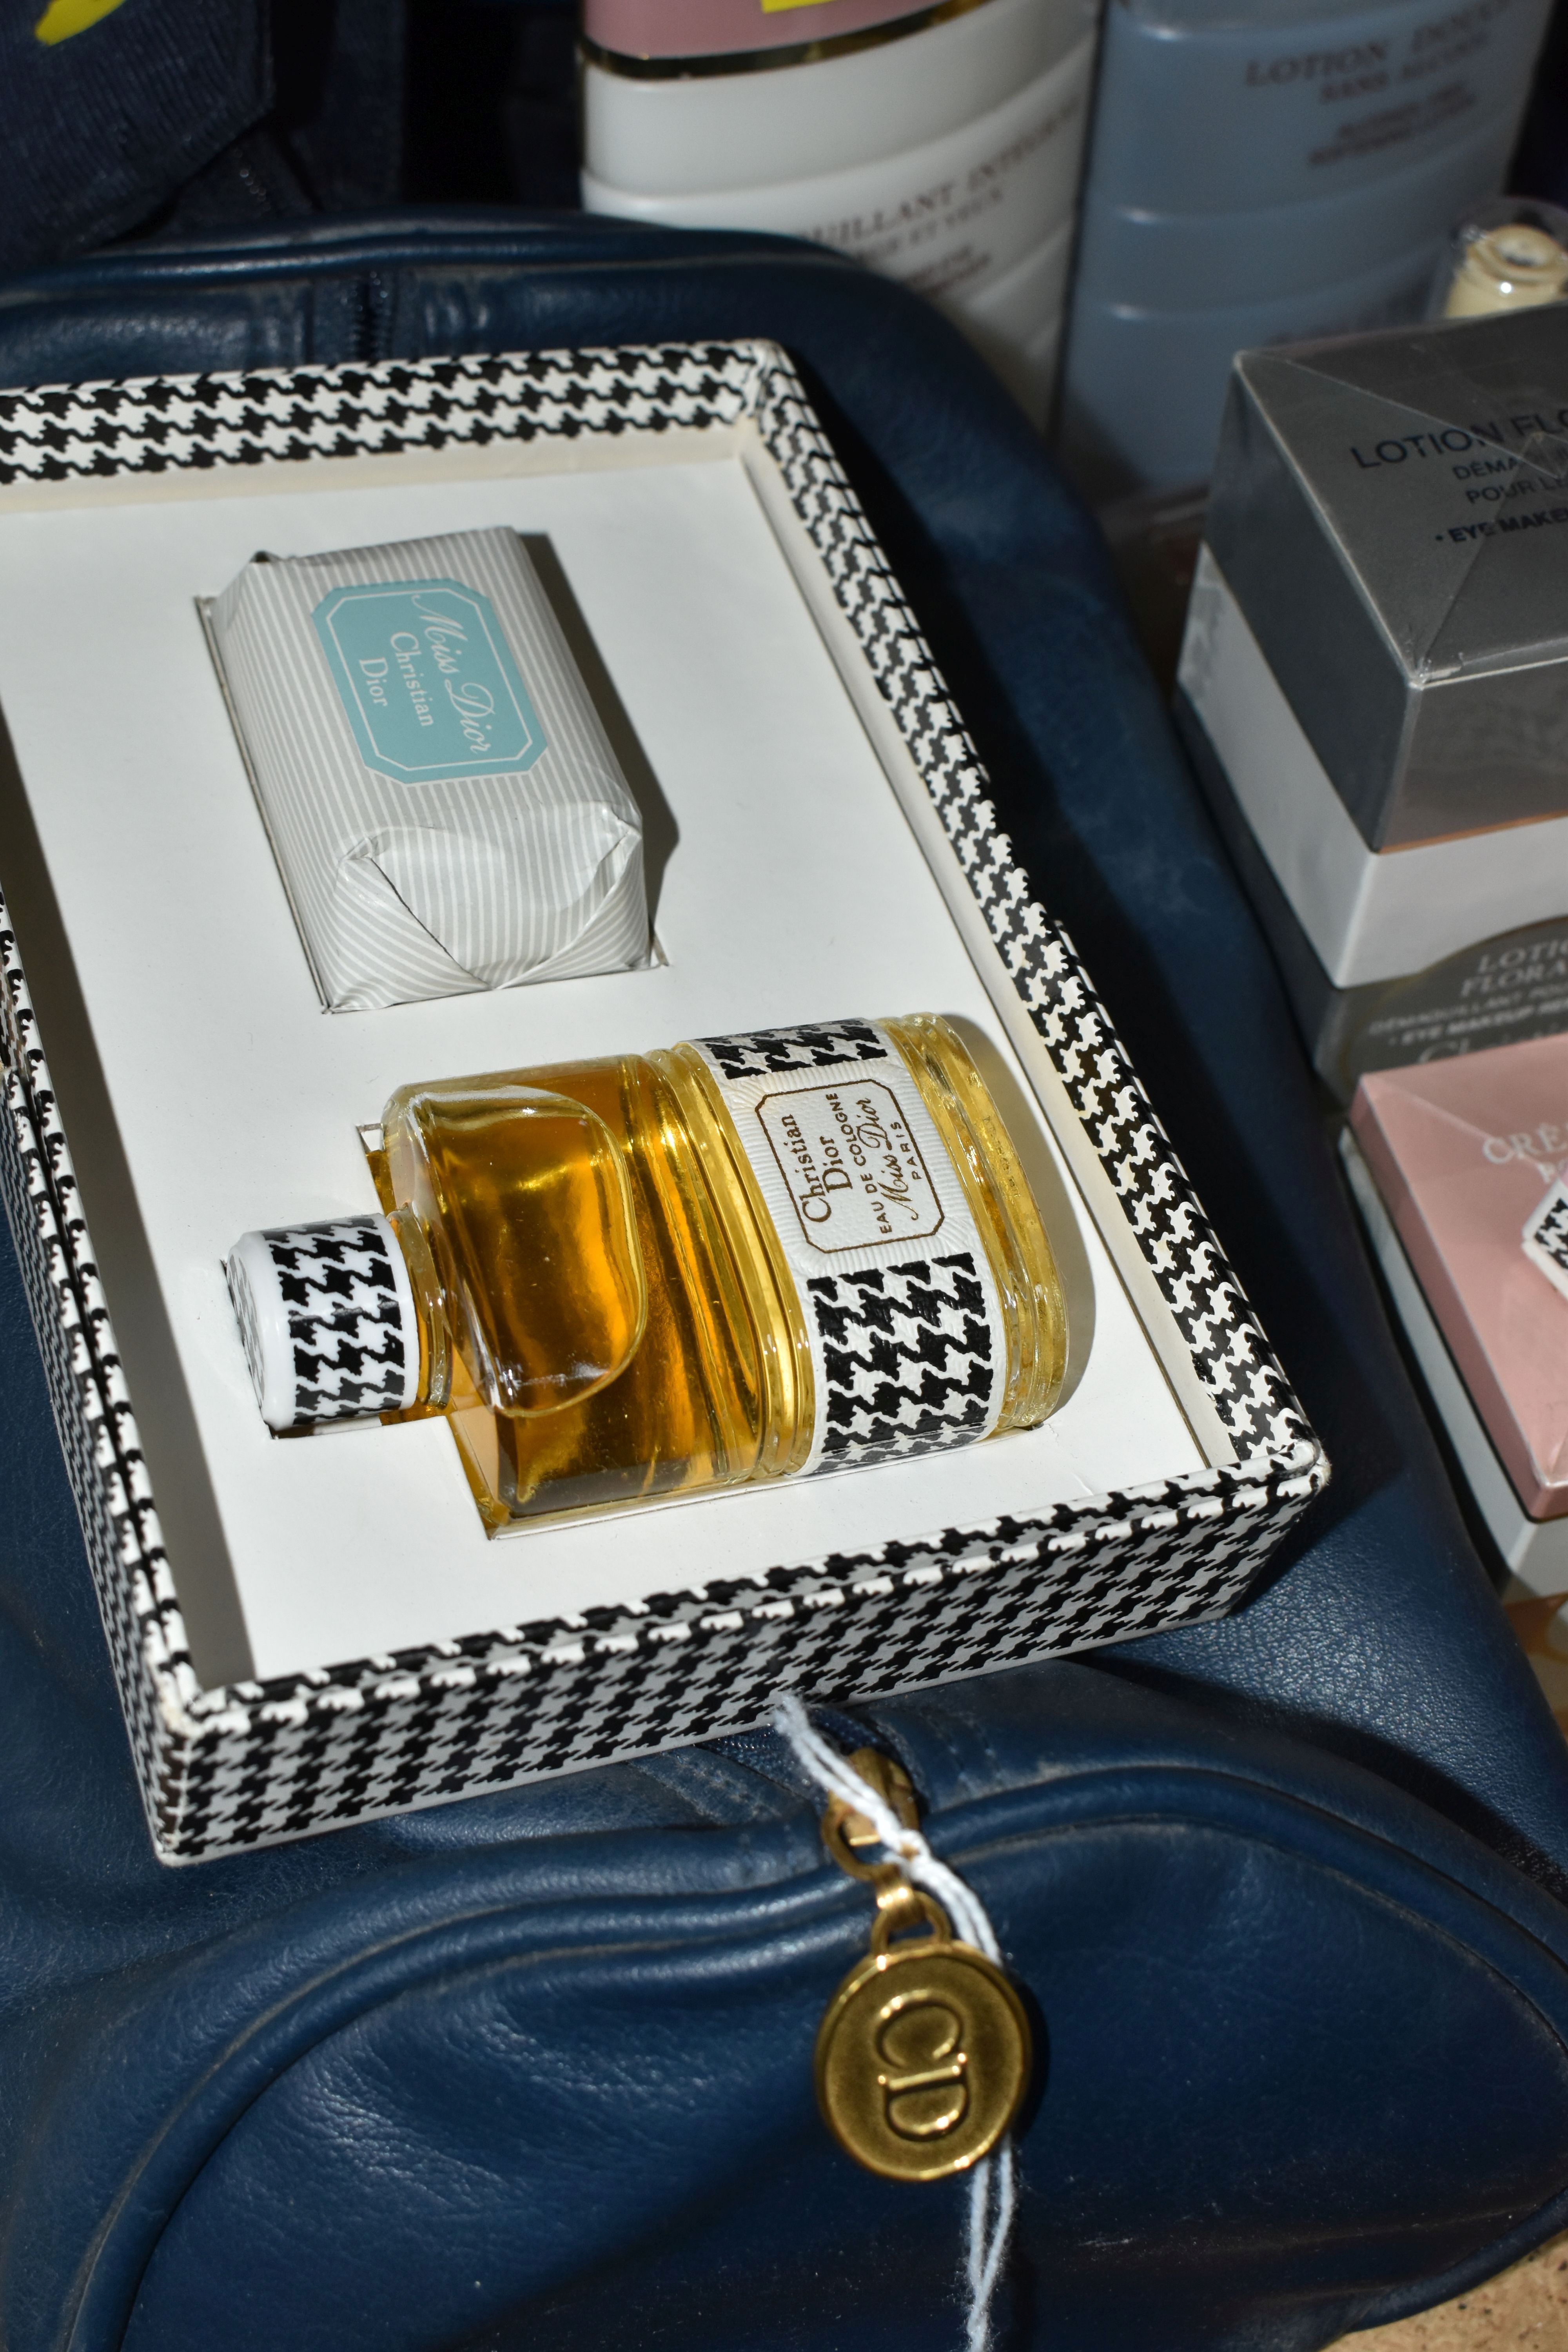 VINTAGE CHRISTIAN DIOR AND MISS DIOR TOILETRIES ETC, to include a boxed Eau de Cologne and soap gift - Image 3 of 5